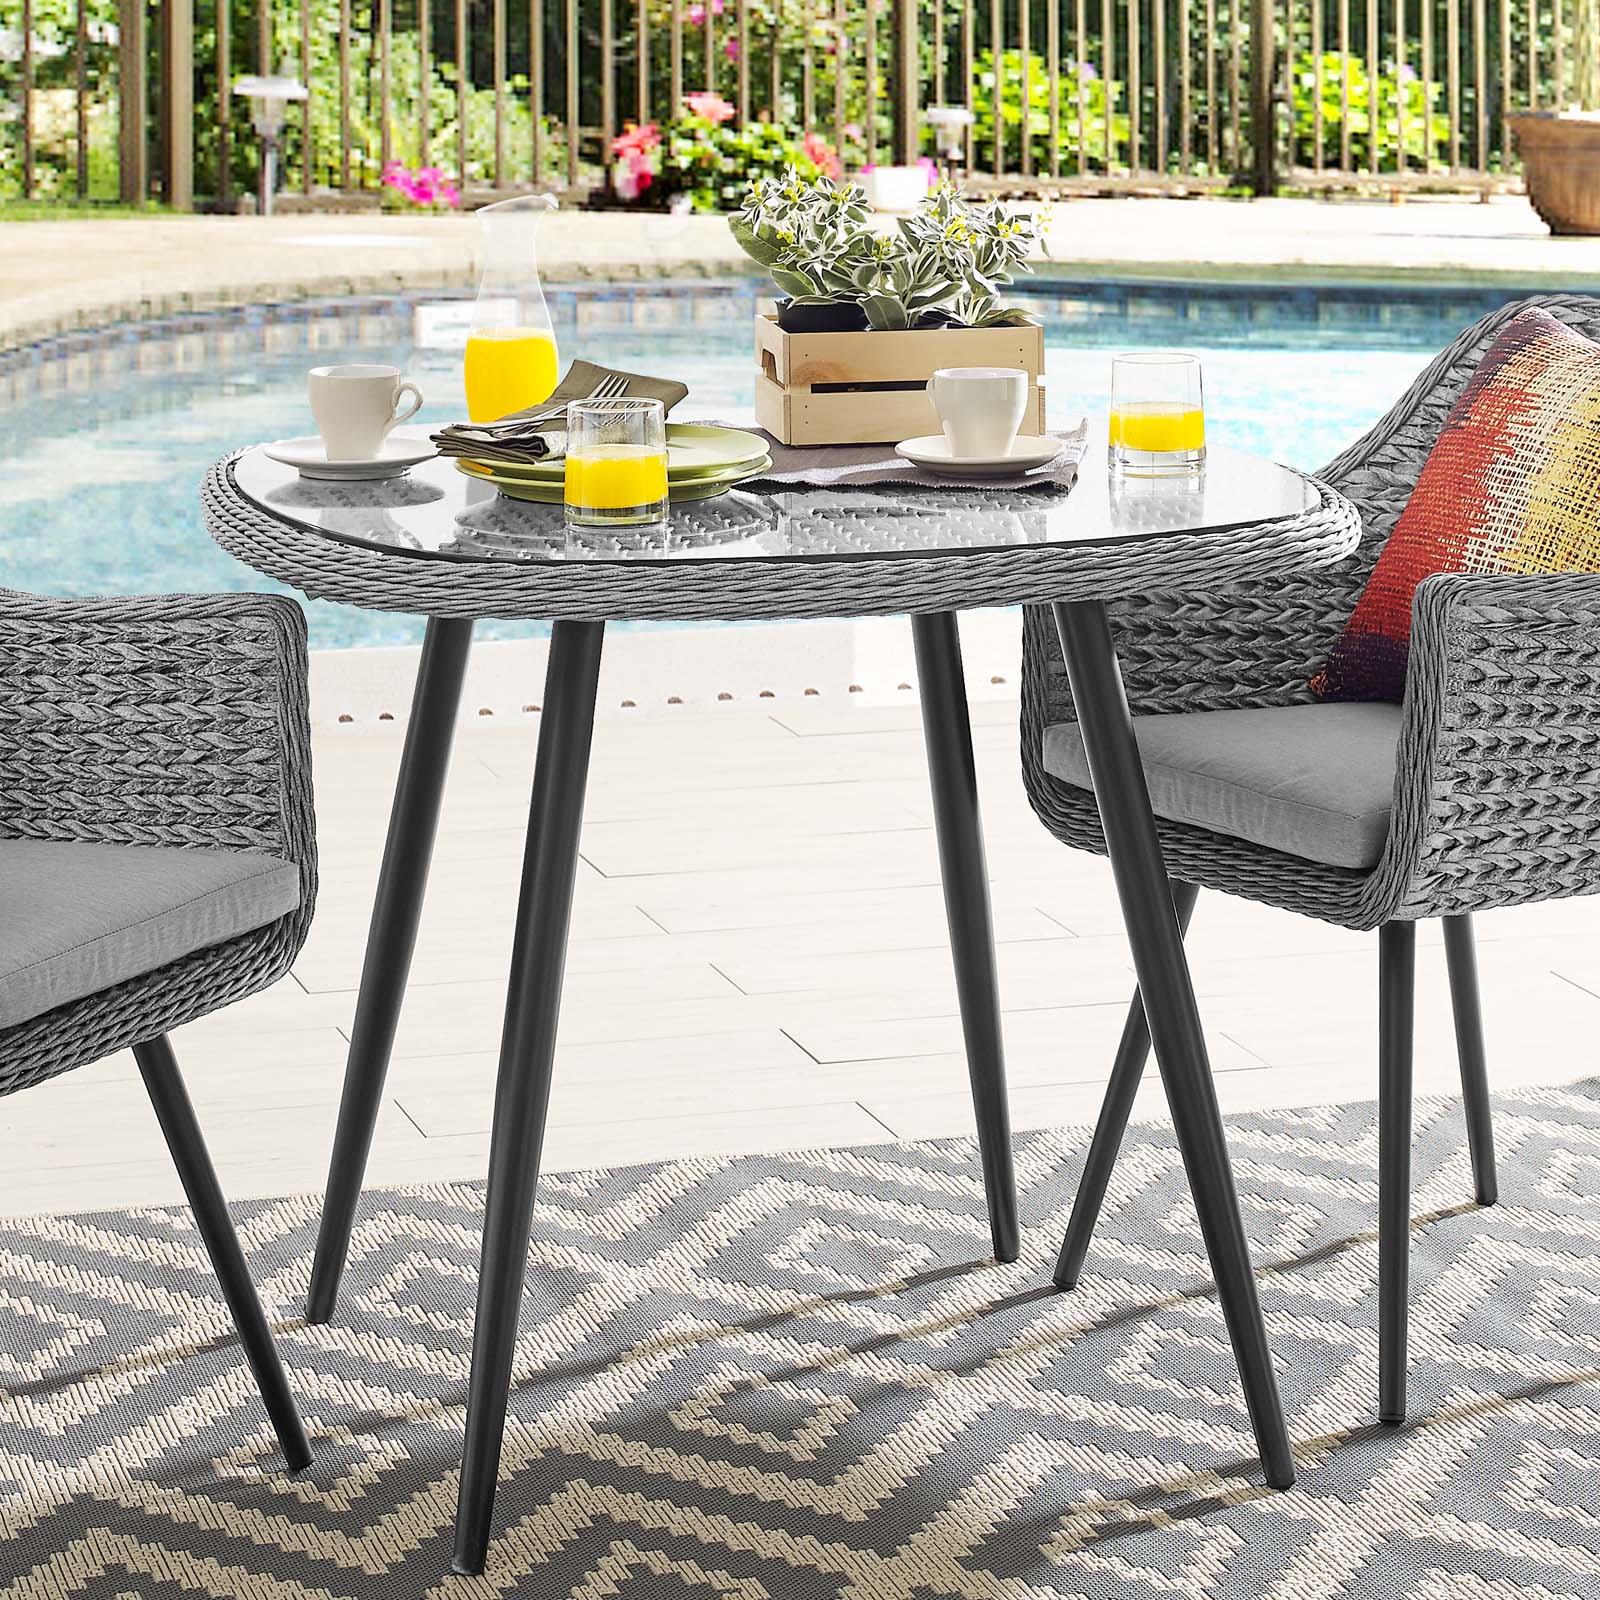 Modway Endeavor 36" Outdoor Patio Wicker Rattan Dining Table in Gray - image 1 of 5